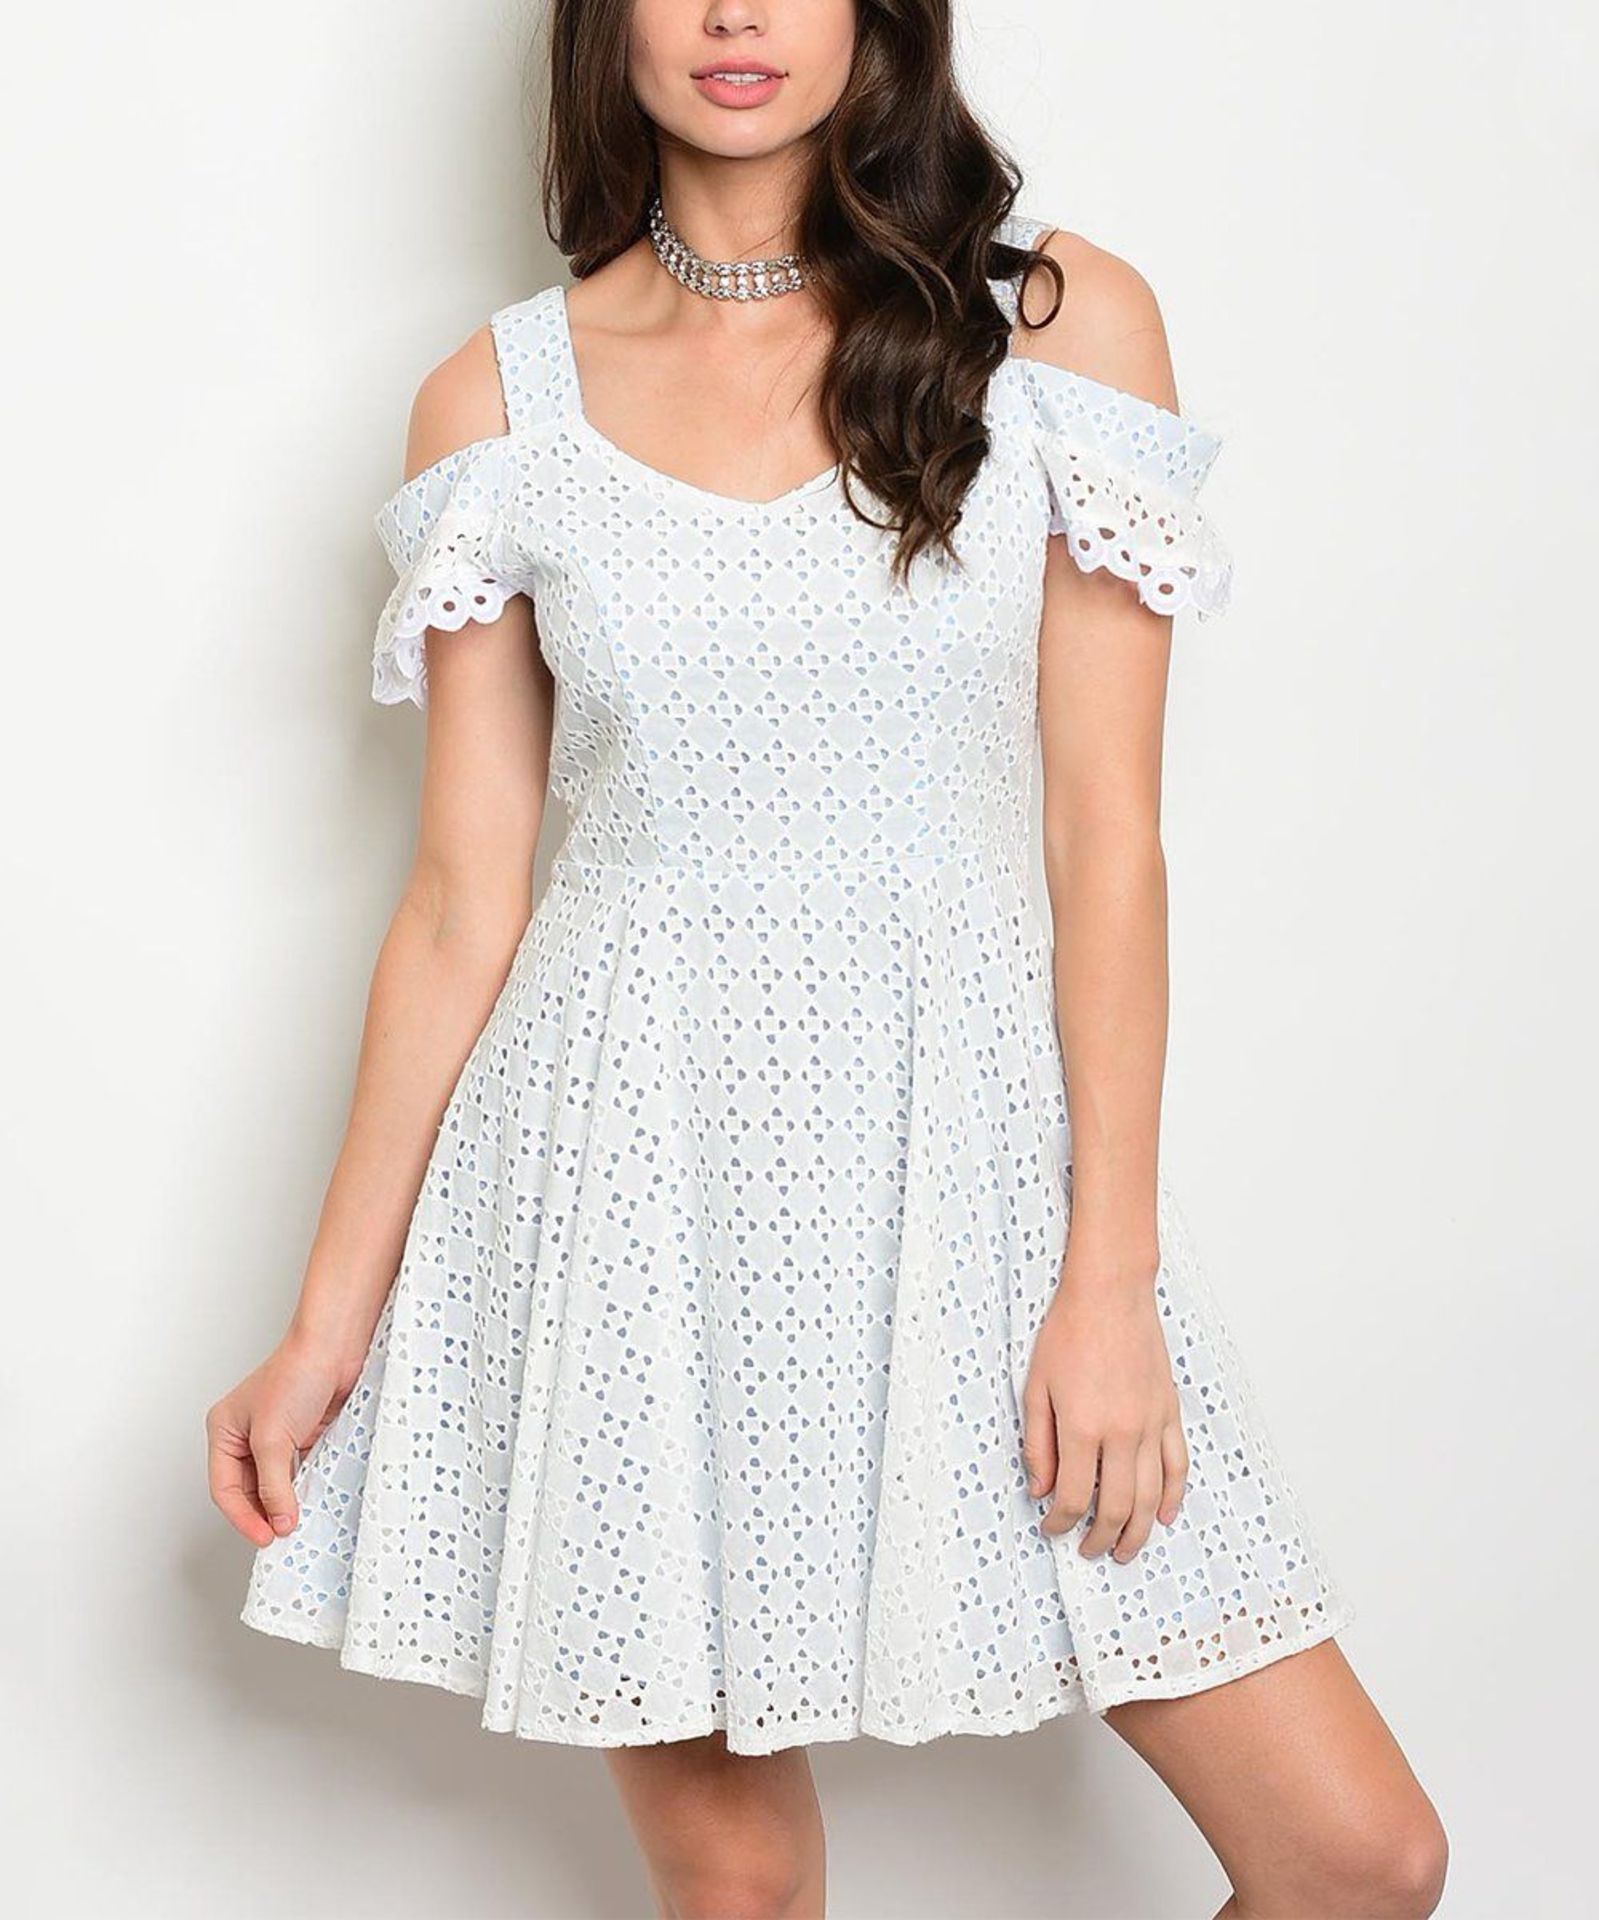 Forever Lily Ivory Blue Eyelet A-Line Dress (Uk Size 16:Us Size 12) (New with tags) [Ref: